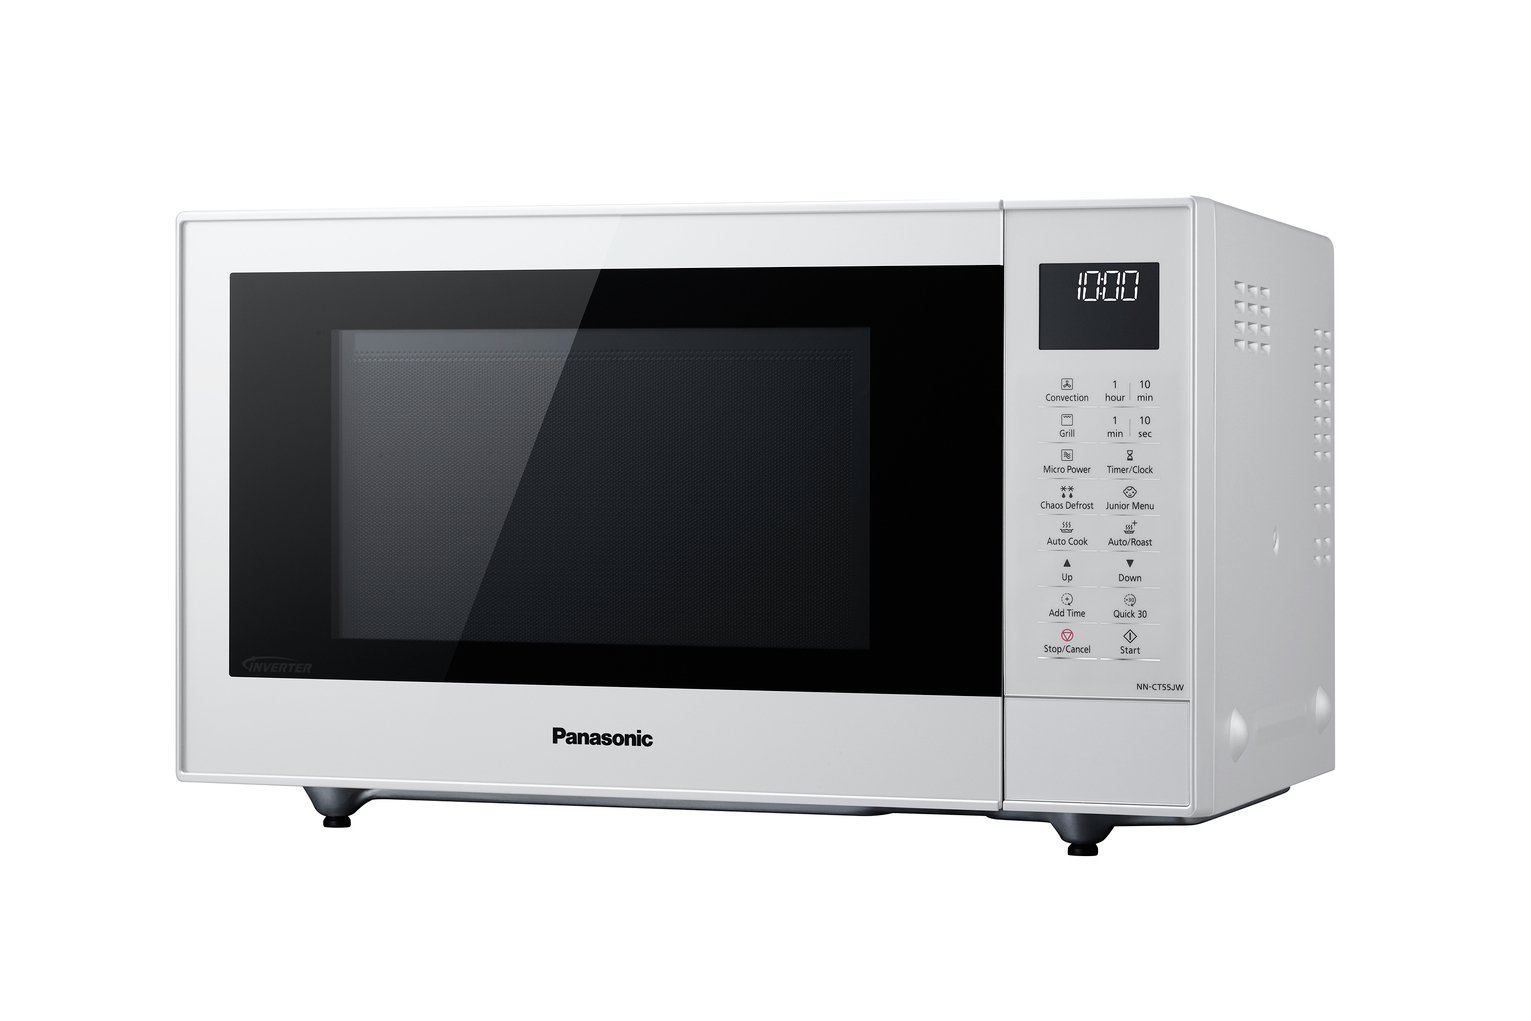 Panasonic 1000W Combination Microwave Oven 27L NN-CT55-White Review